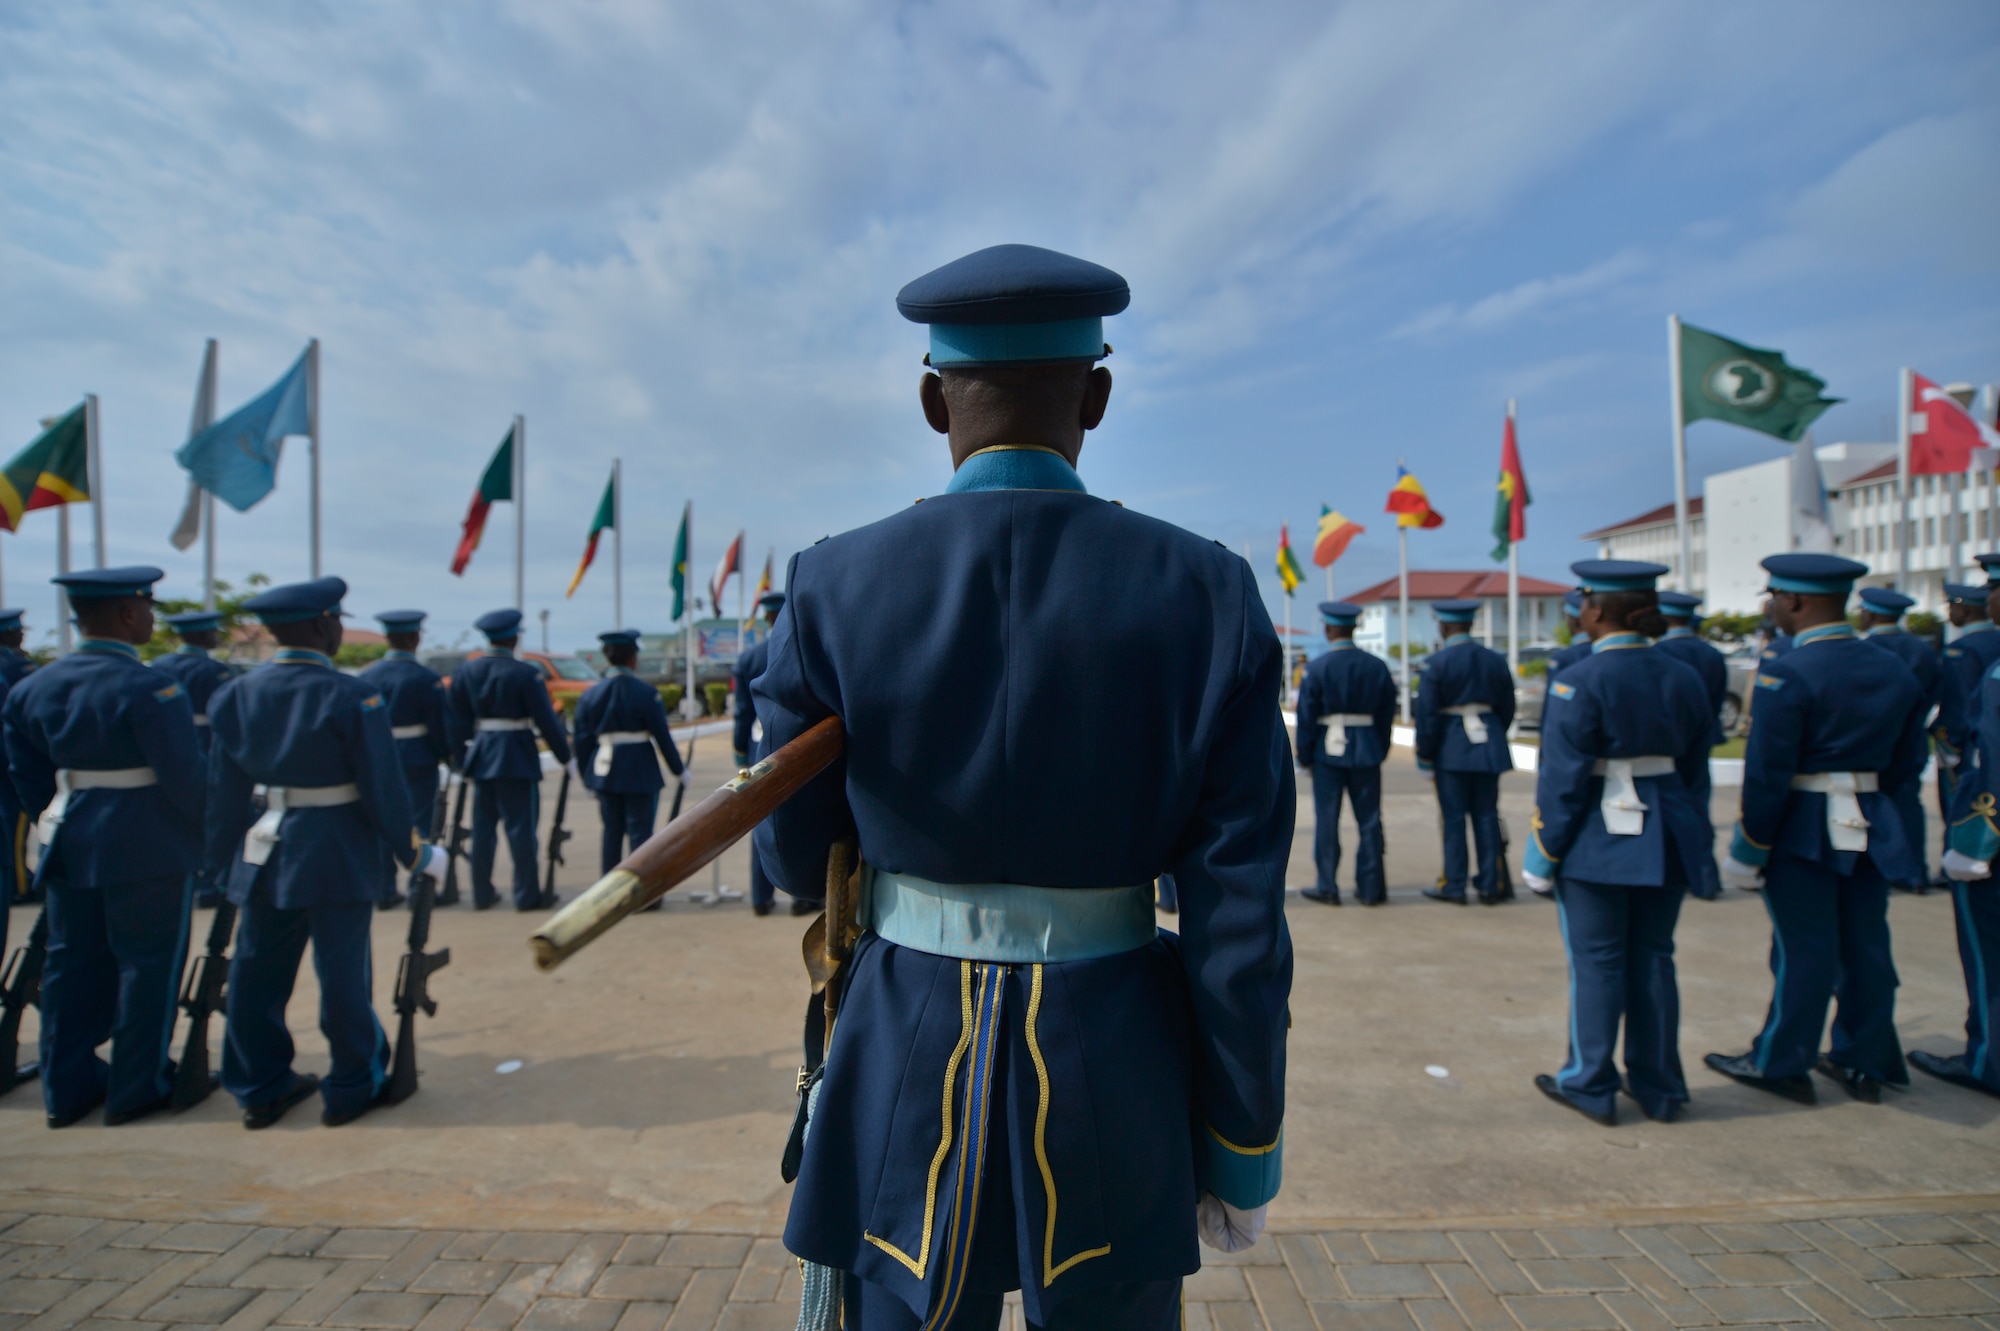 The Ghanaian air force guard of honor awaits the arrival of the 2013 Regional 
Air Chiefs Symposium official party, Aug. 20, 2013, Accra, Ghana. The Ghanaian 
air force opened the 2013 Regional Air Chiefs Symposium with a traditional 
troop guard ceremony to honor the senior ranking officer in attendance. (U.S. 
Air Force photo by Airman 1st Class Jordan Castelan/Released)
